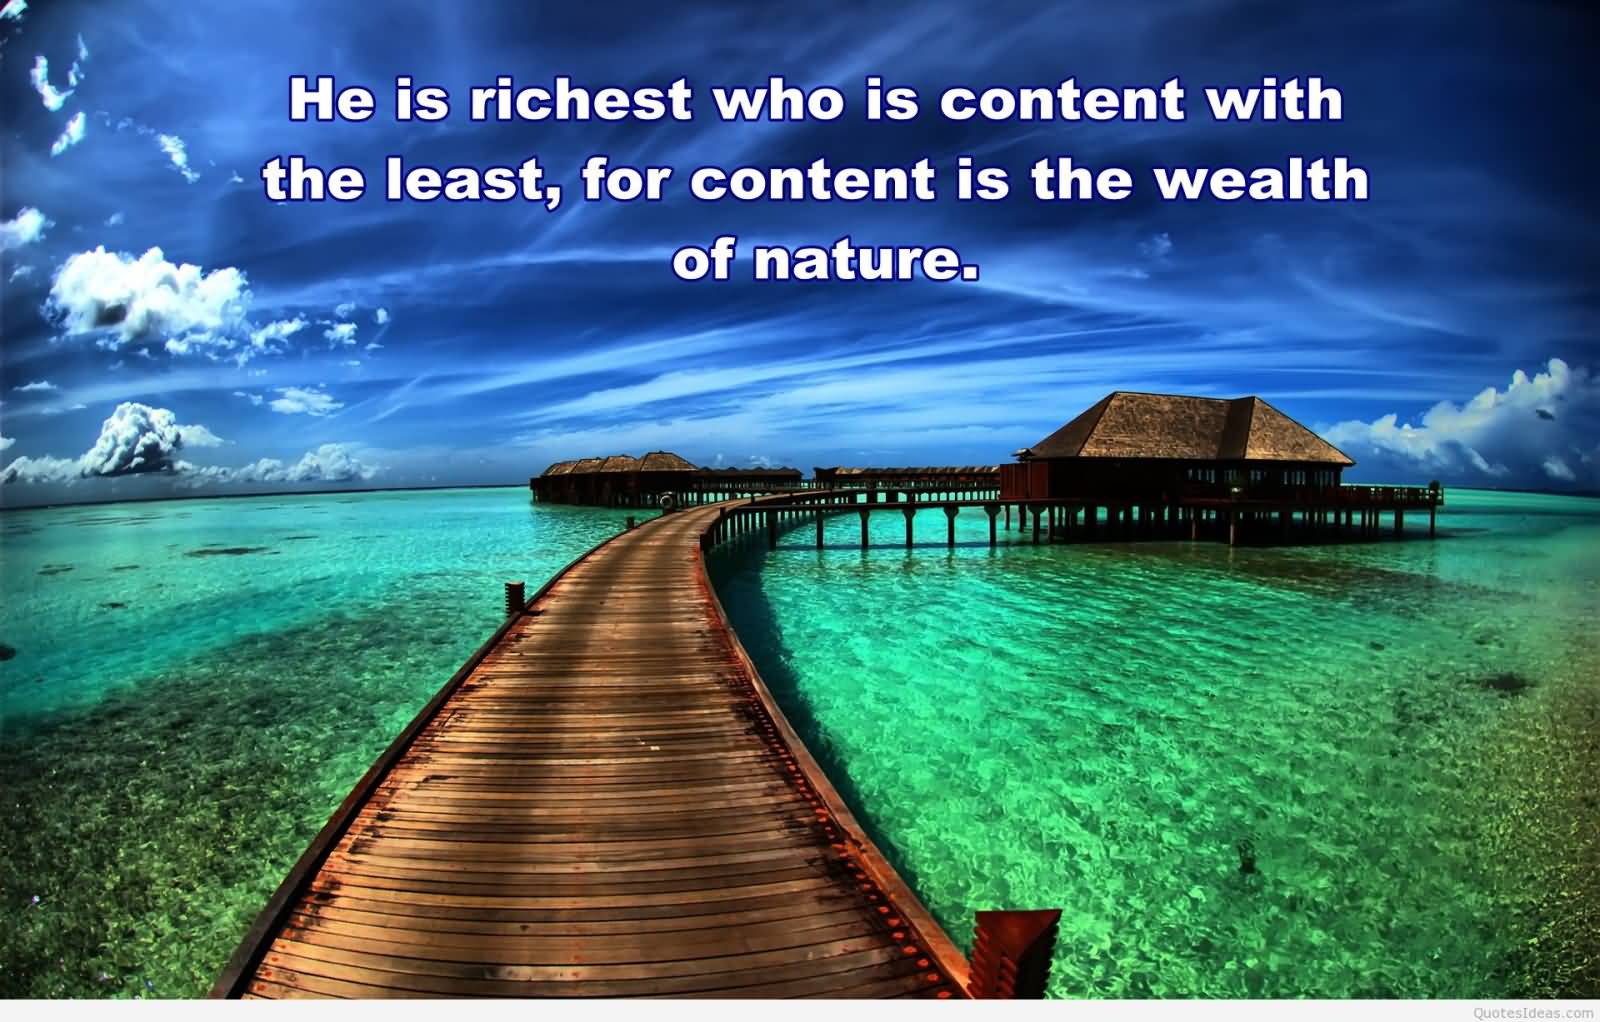 He is richest who is content with the least, for content is the wealth of nature. - Socrates